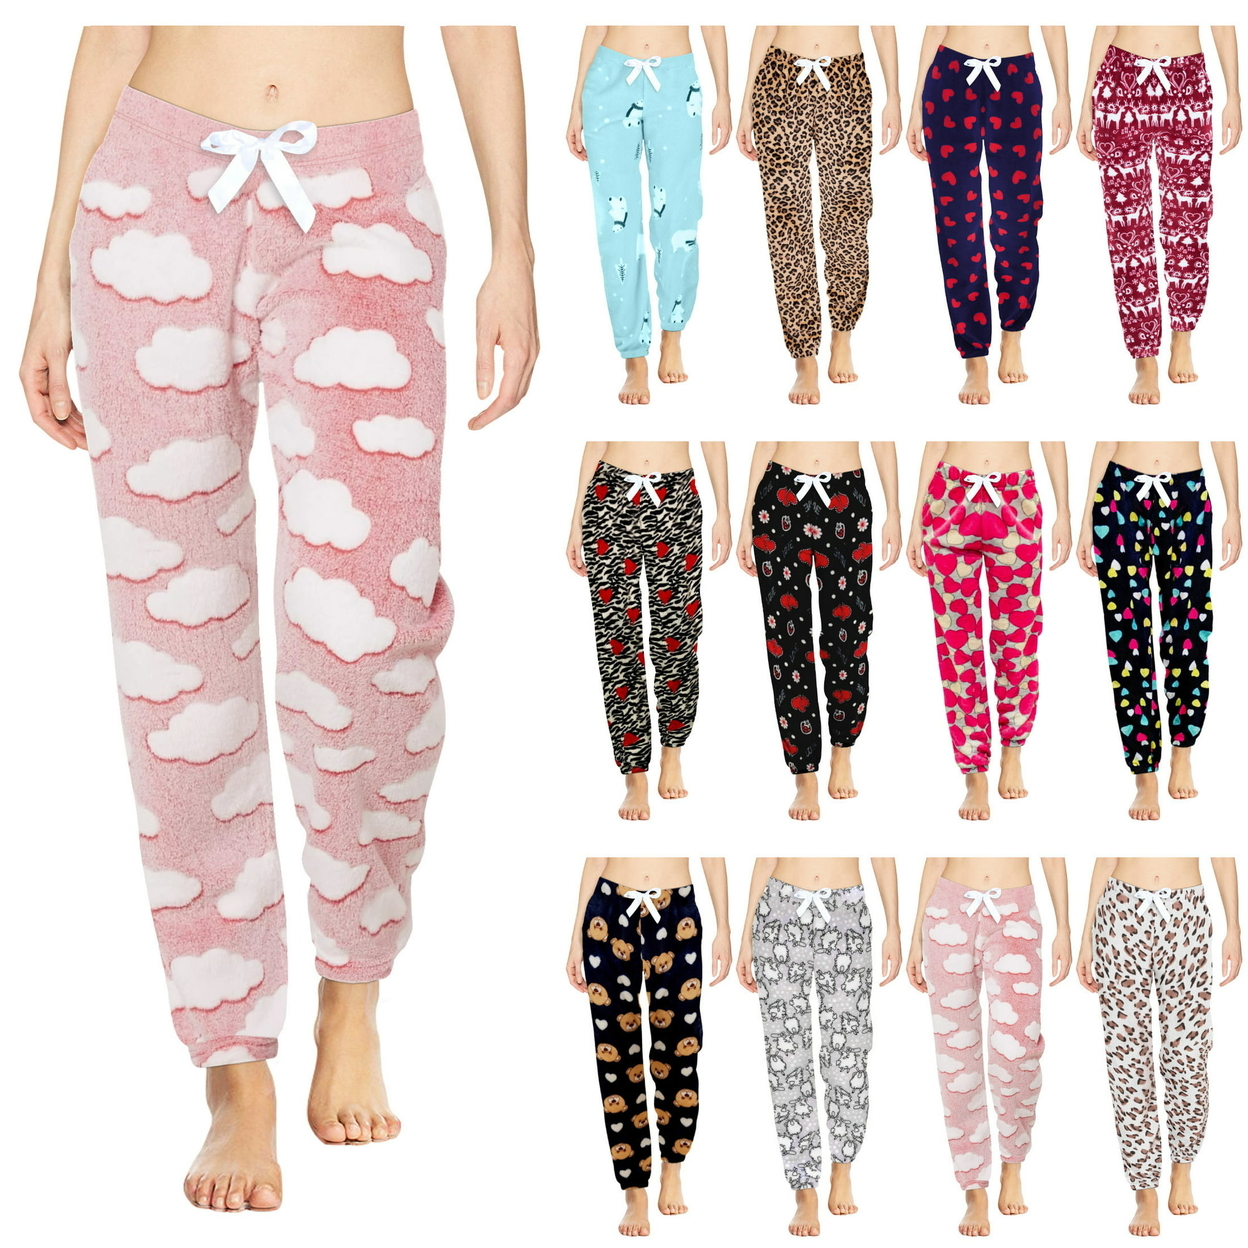 3-Pack: Women's Solid & Printed Ultra-Soft Comfy Stretch Micro-Fleece Pajama Lounge Pants - Large, Love